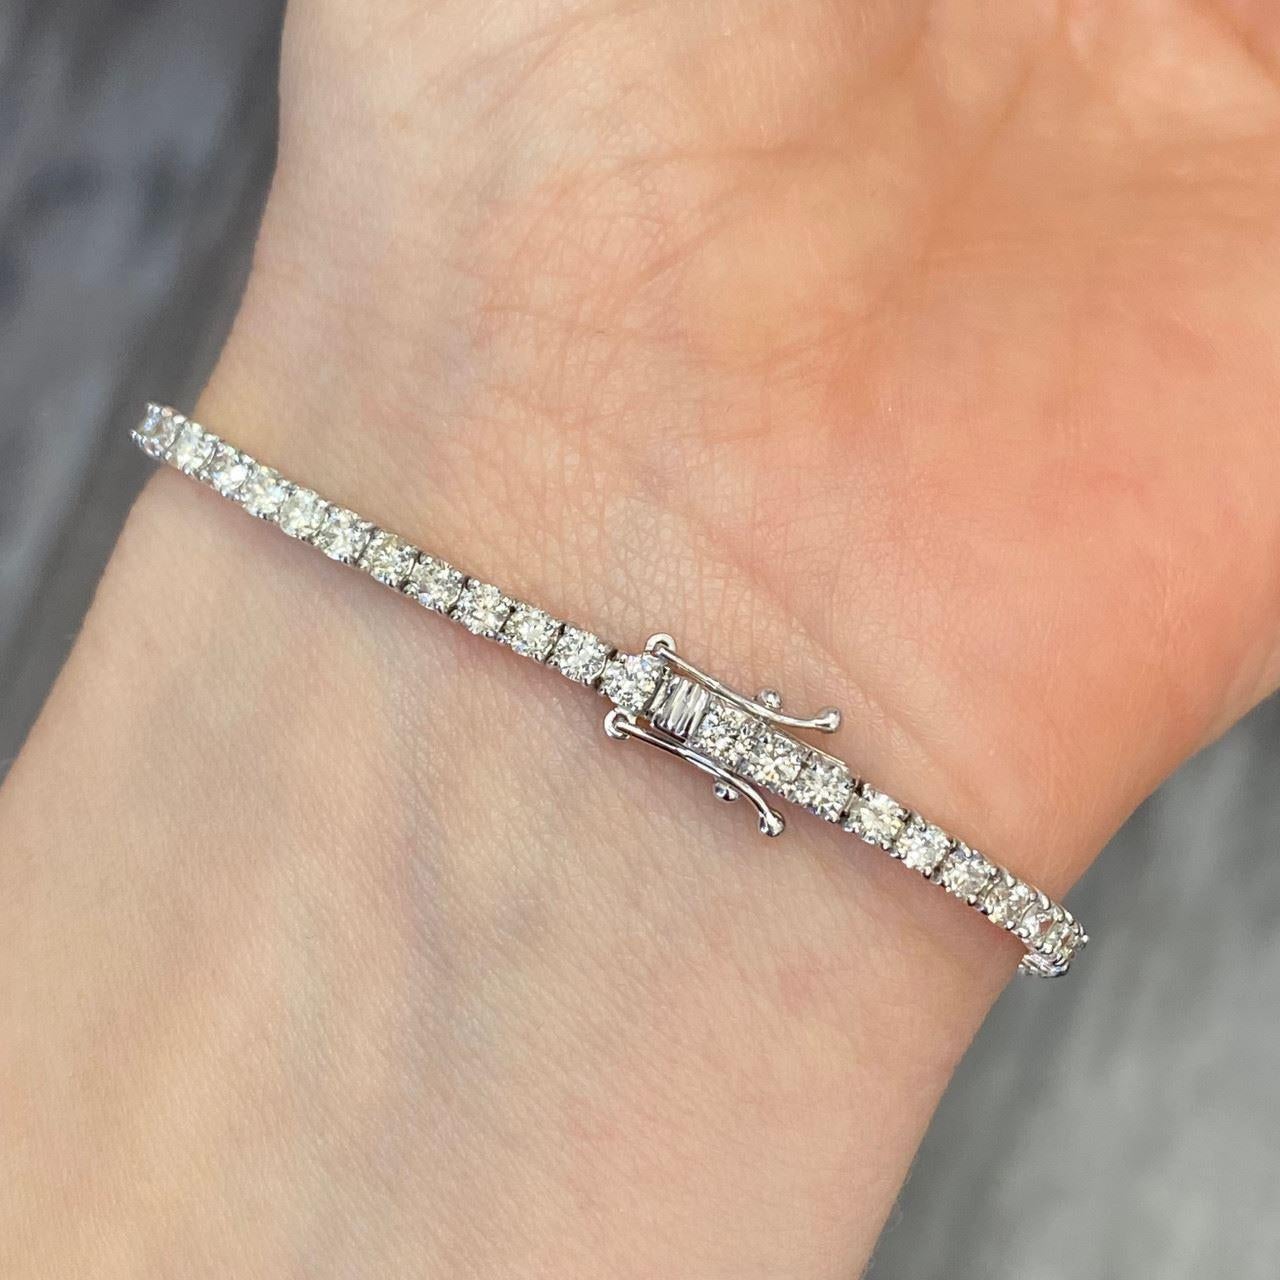 Contemporary 14k White Gold Diamond Tennis Bracelet Weighing 4.50ctw For Sale